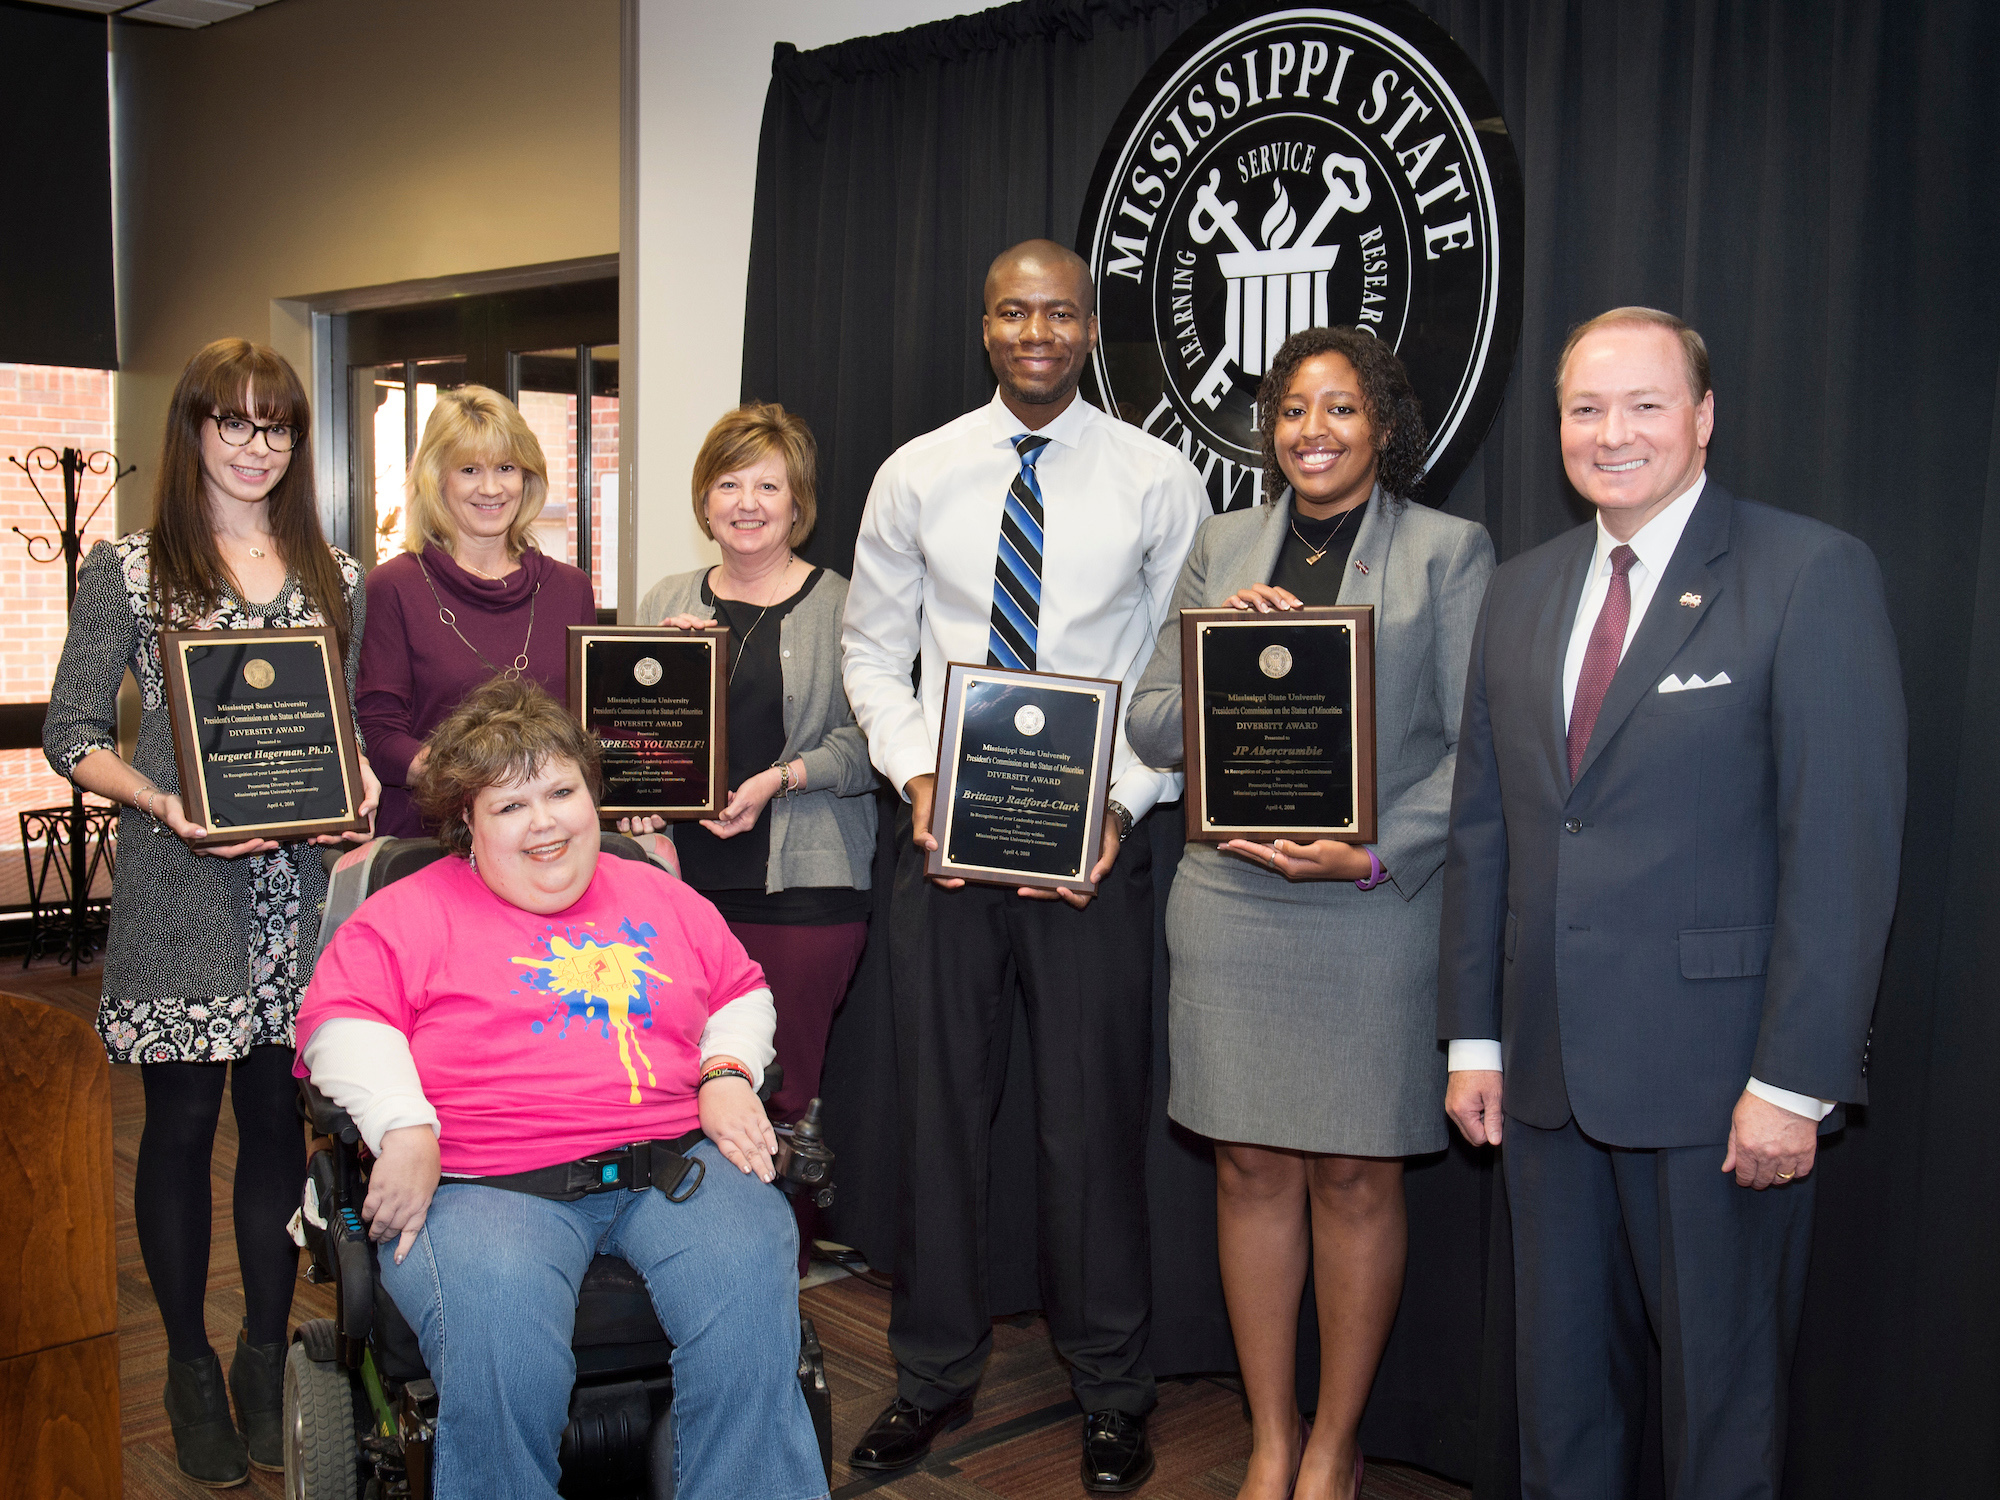 Mississippi State’s 2018 Diversity Award winners are EXPRESS Yourself! artist Candace Stephenson, pictured in front; back, from left, MSU Assistant Professor of Sociology Margaret A. Hagerman, EXPRESS Yourself! trackers Laurie Craig and Judy Duncan, David Clark (accepting on behalf of MSU graduate student Brittany Radford-Clark) and JP Abercrumbie, MSU assistant athletic director for life skills and community engagement. MSU President Mark E. Keenum, right, congratulated the honorees during an April 4 awards ceremony. (Photo by Megan Bean)